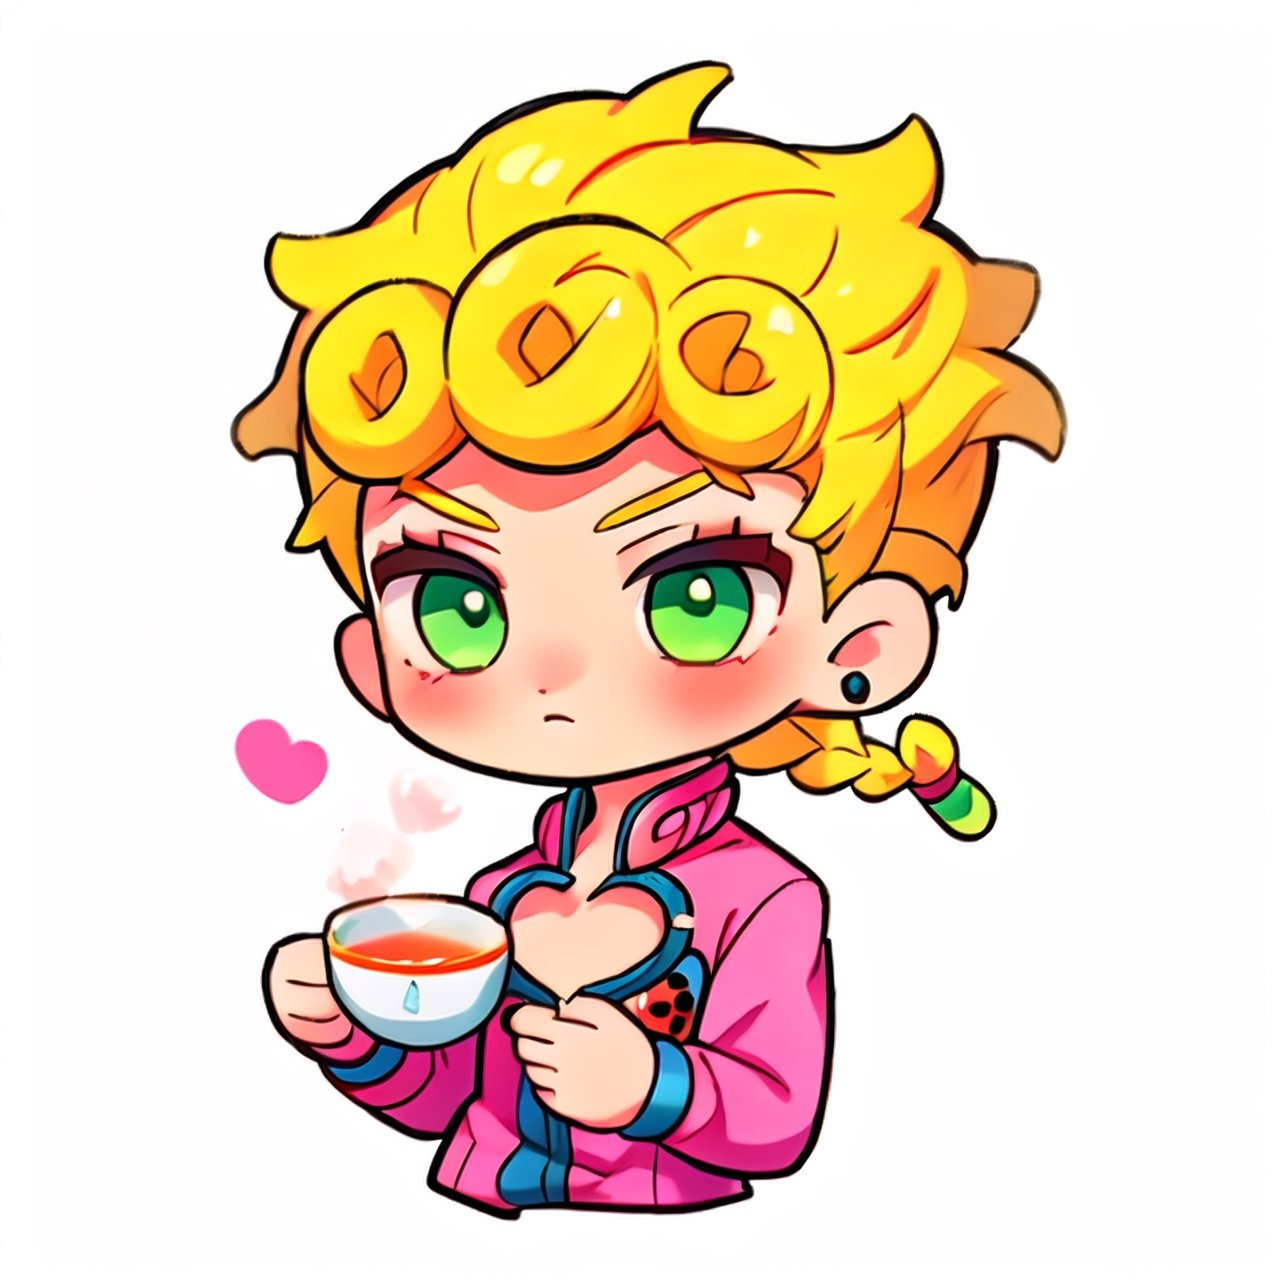 1boy, giornojojo, upper body, pectoral, ((clevage cutout)), blonde hair, braid, pink outfit,chibi, cute, green eyes, blue stud earrings, holding tea, kawaii, sticker art, ,giornojojo,blue outfit